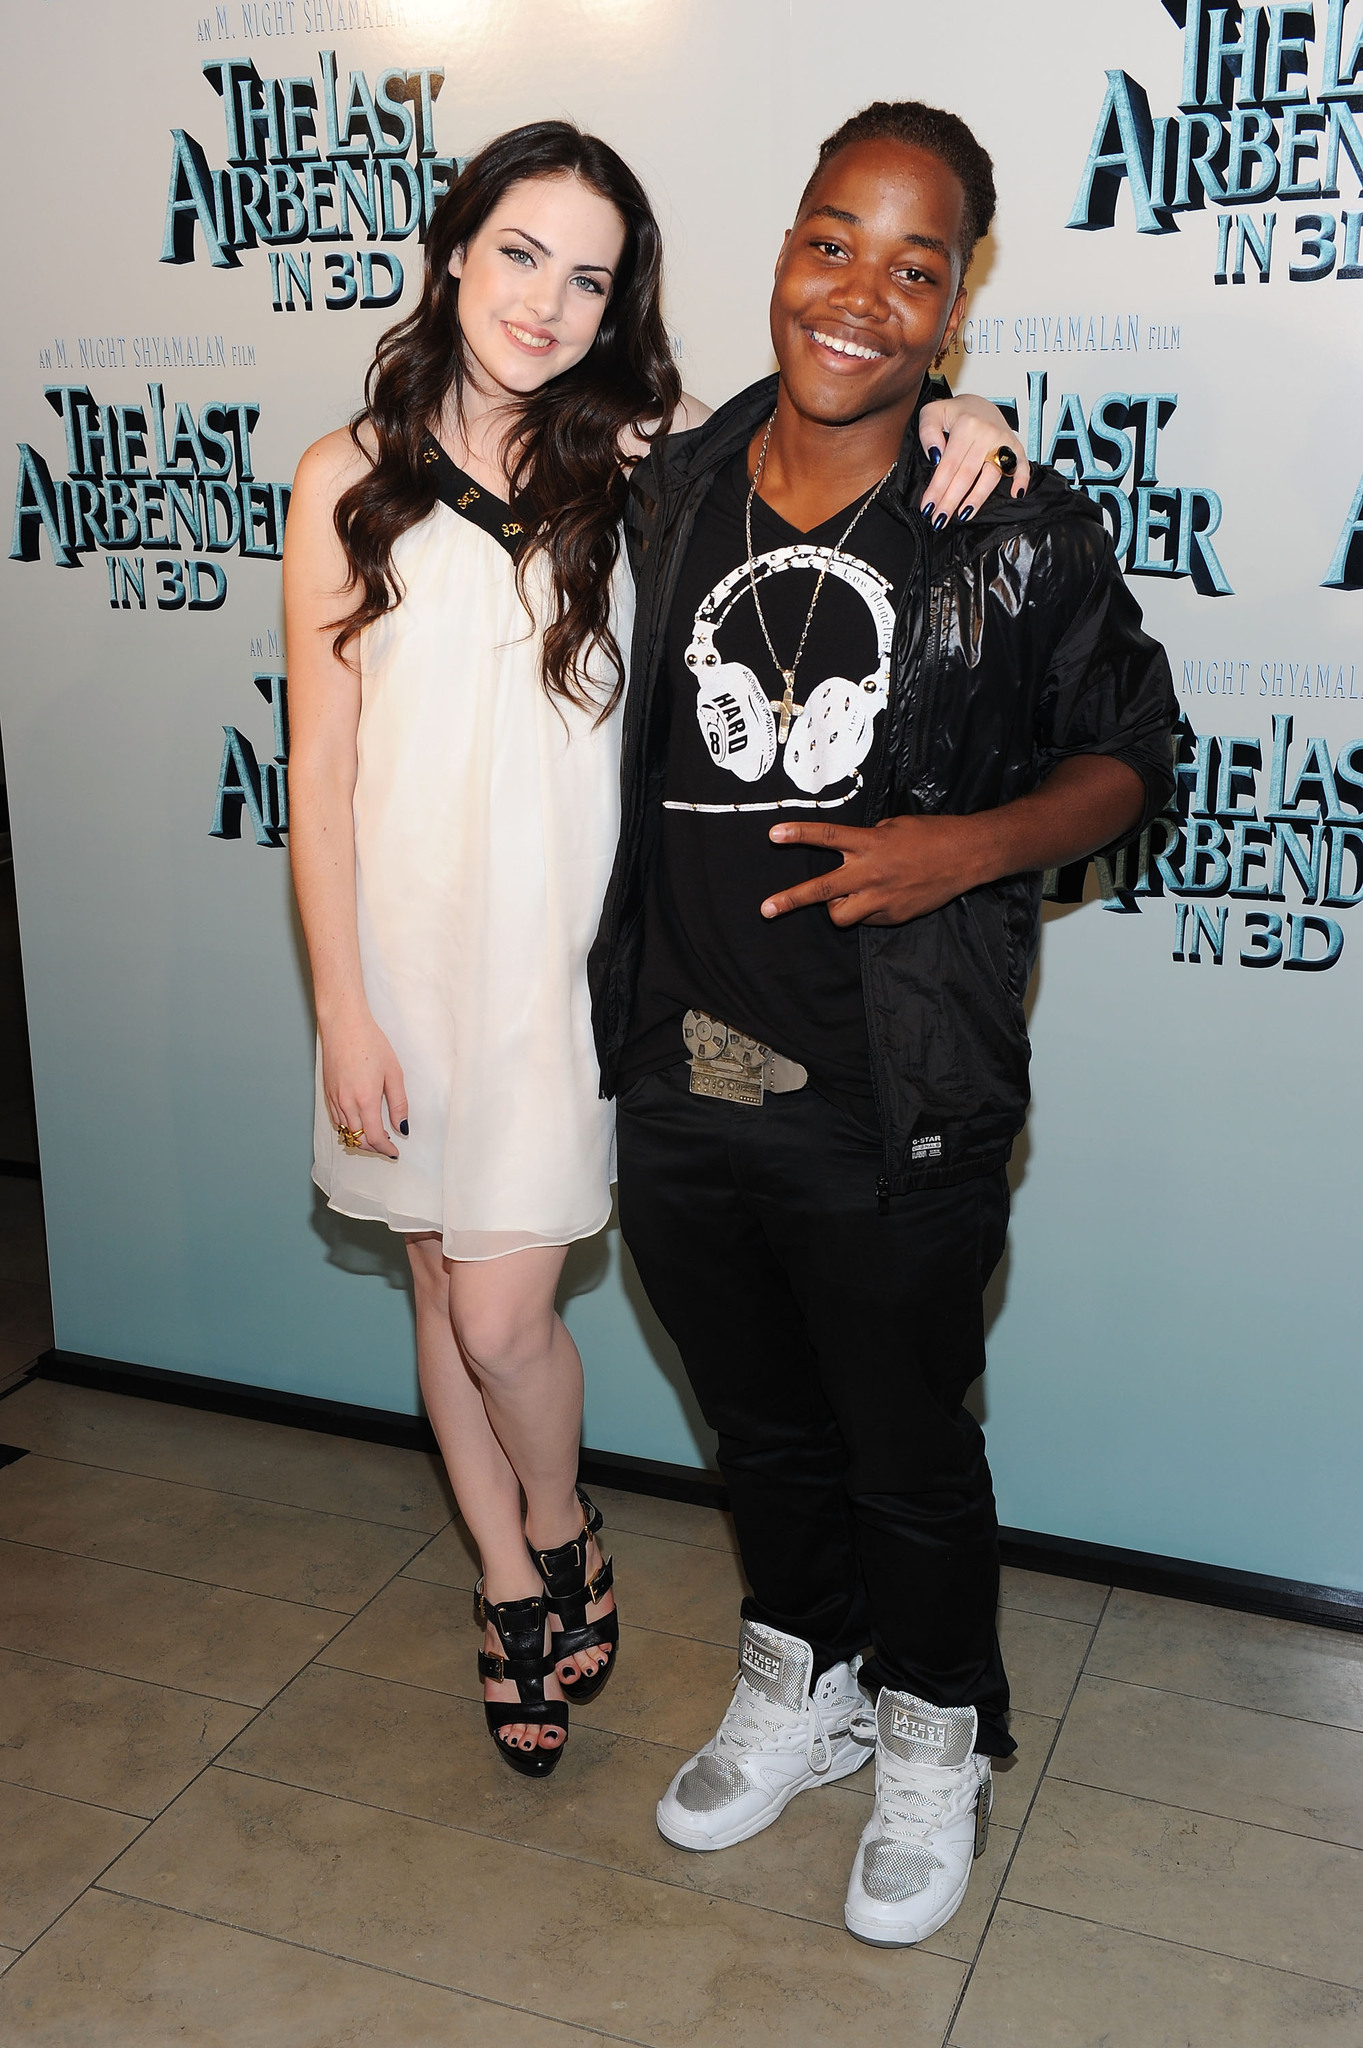 Leon Thomas III and Elizabeth Gillies at event of The Last Airbender (2010)